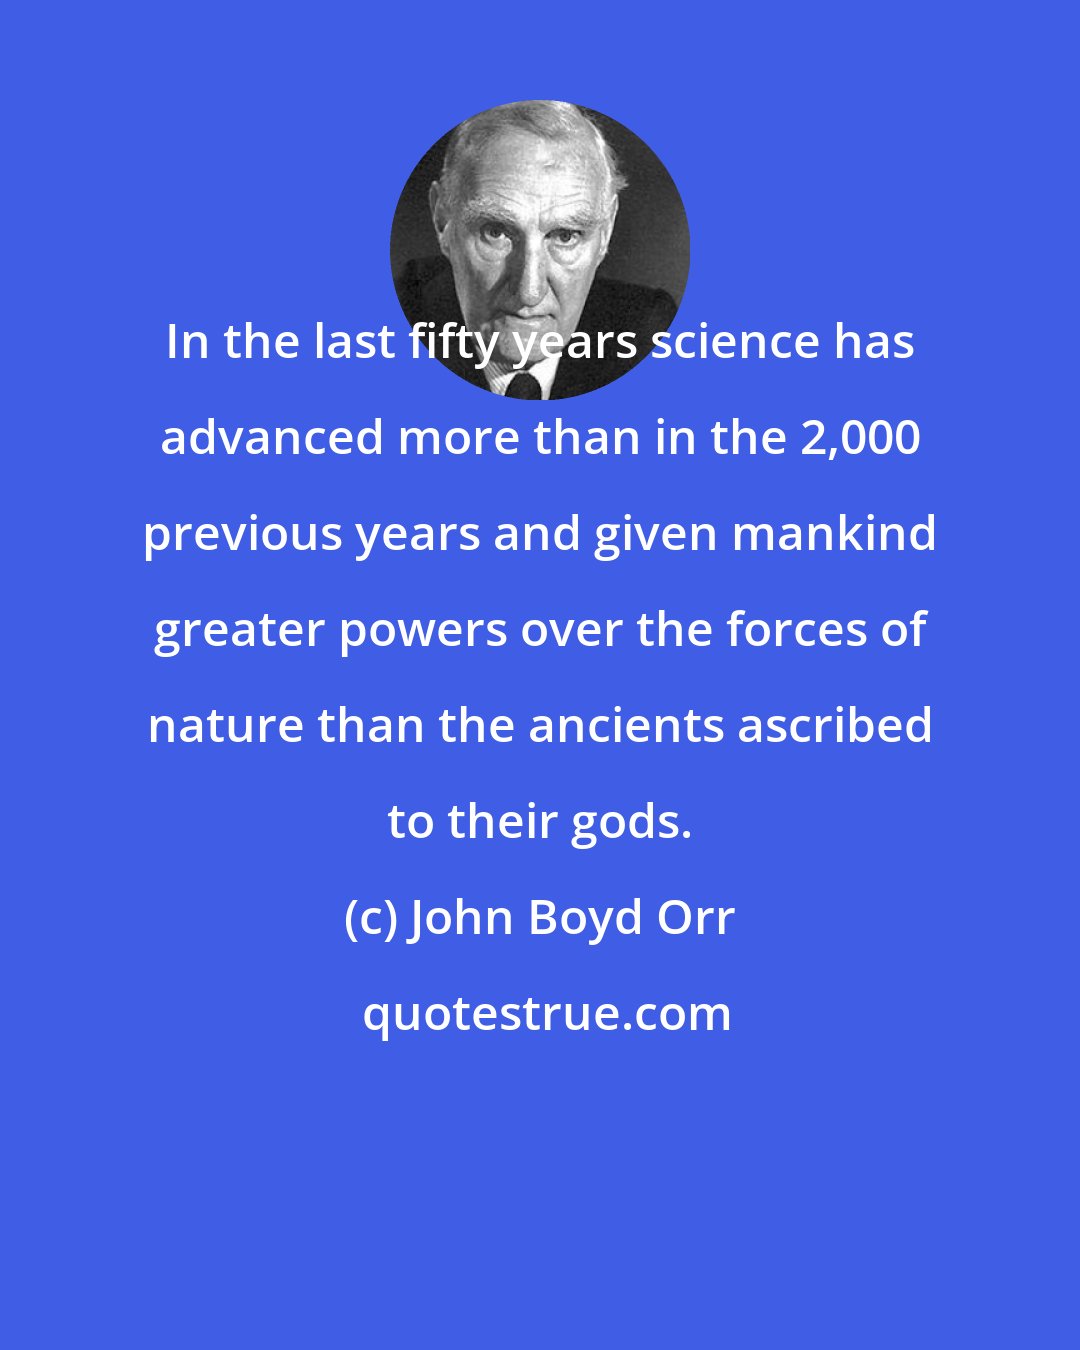 John Boyd Orr: In the last fifty years science has advanced more than in the 2,000 previous years and given mankind greater powers over the forces of nature than the ancients ascribed to their gods.